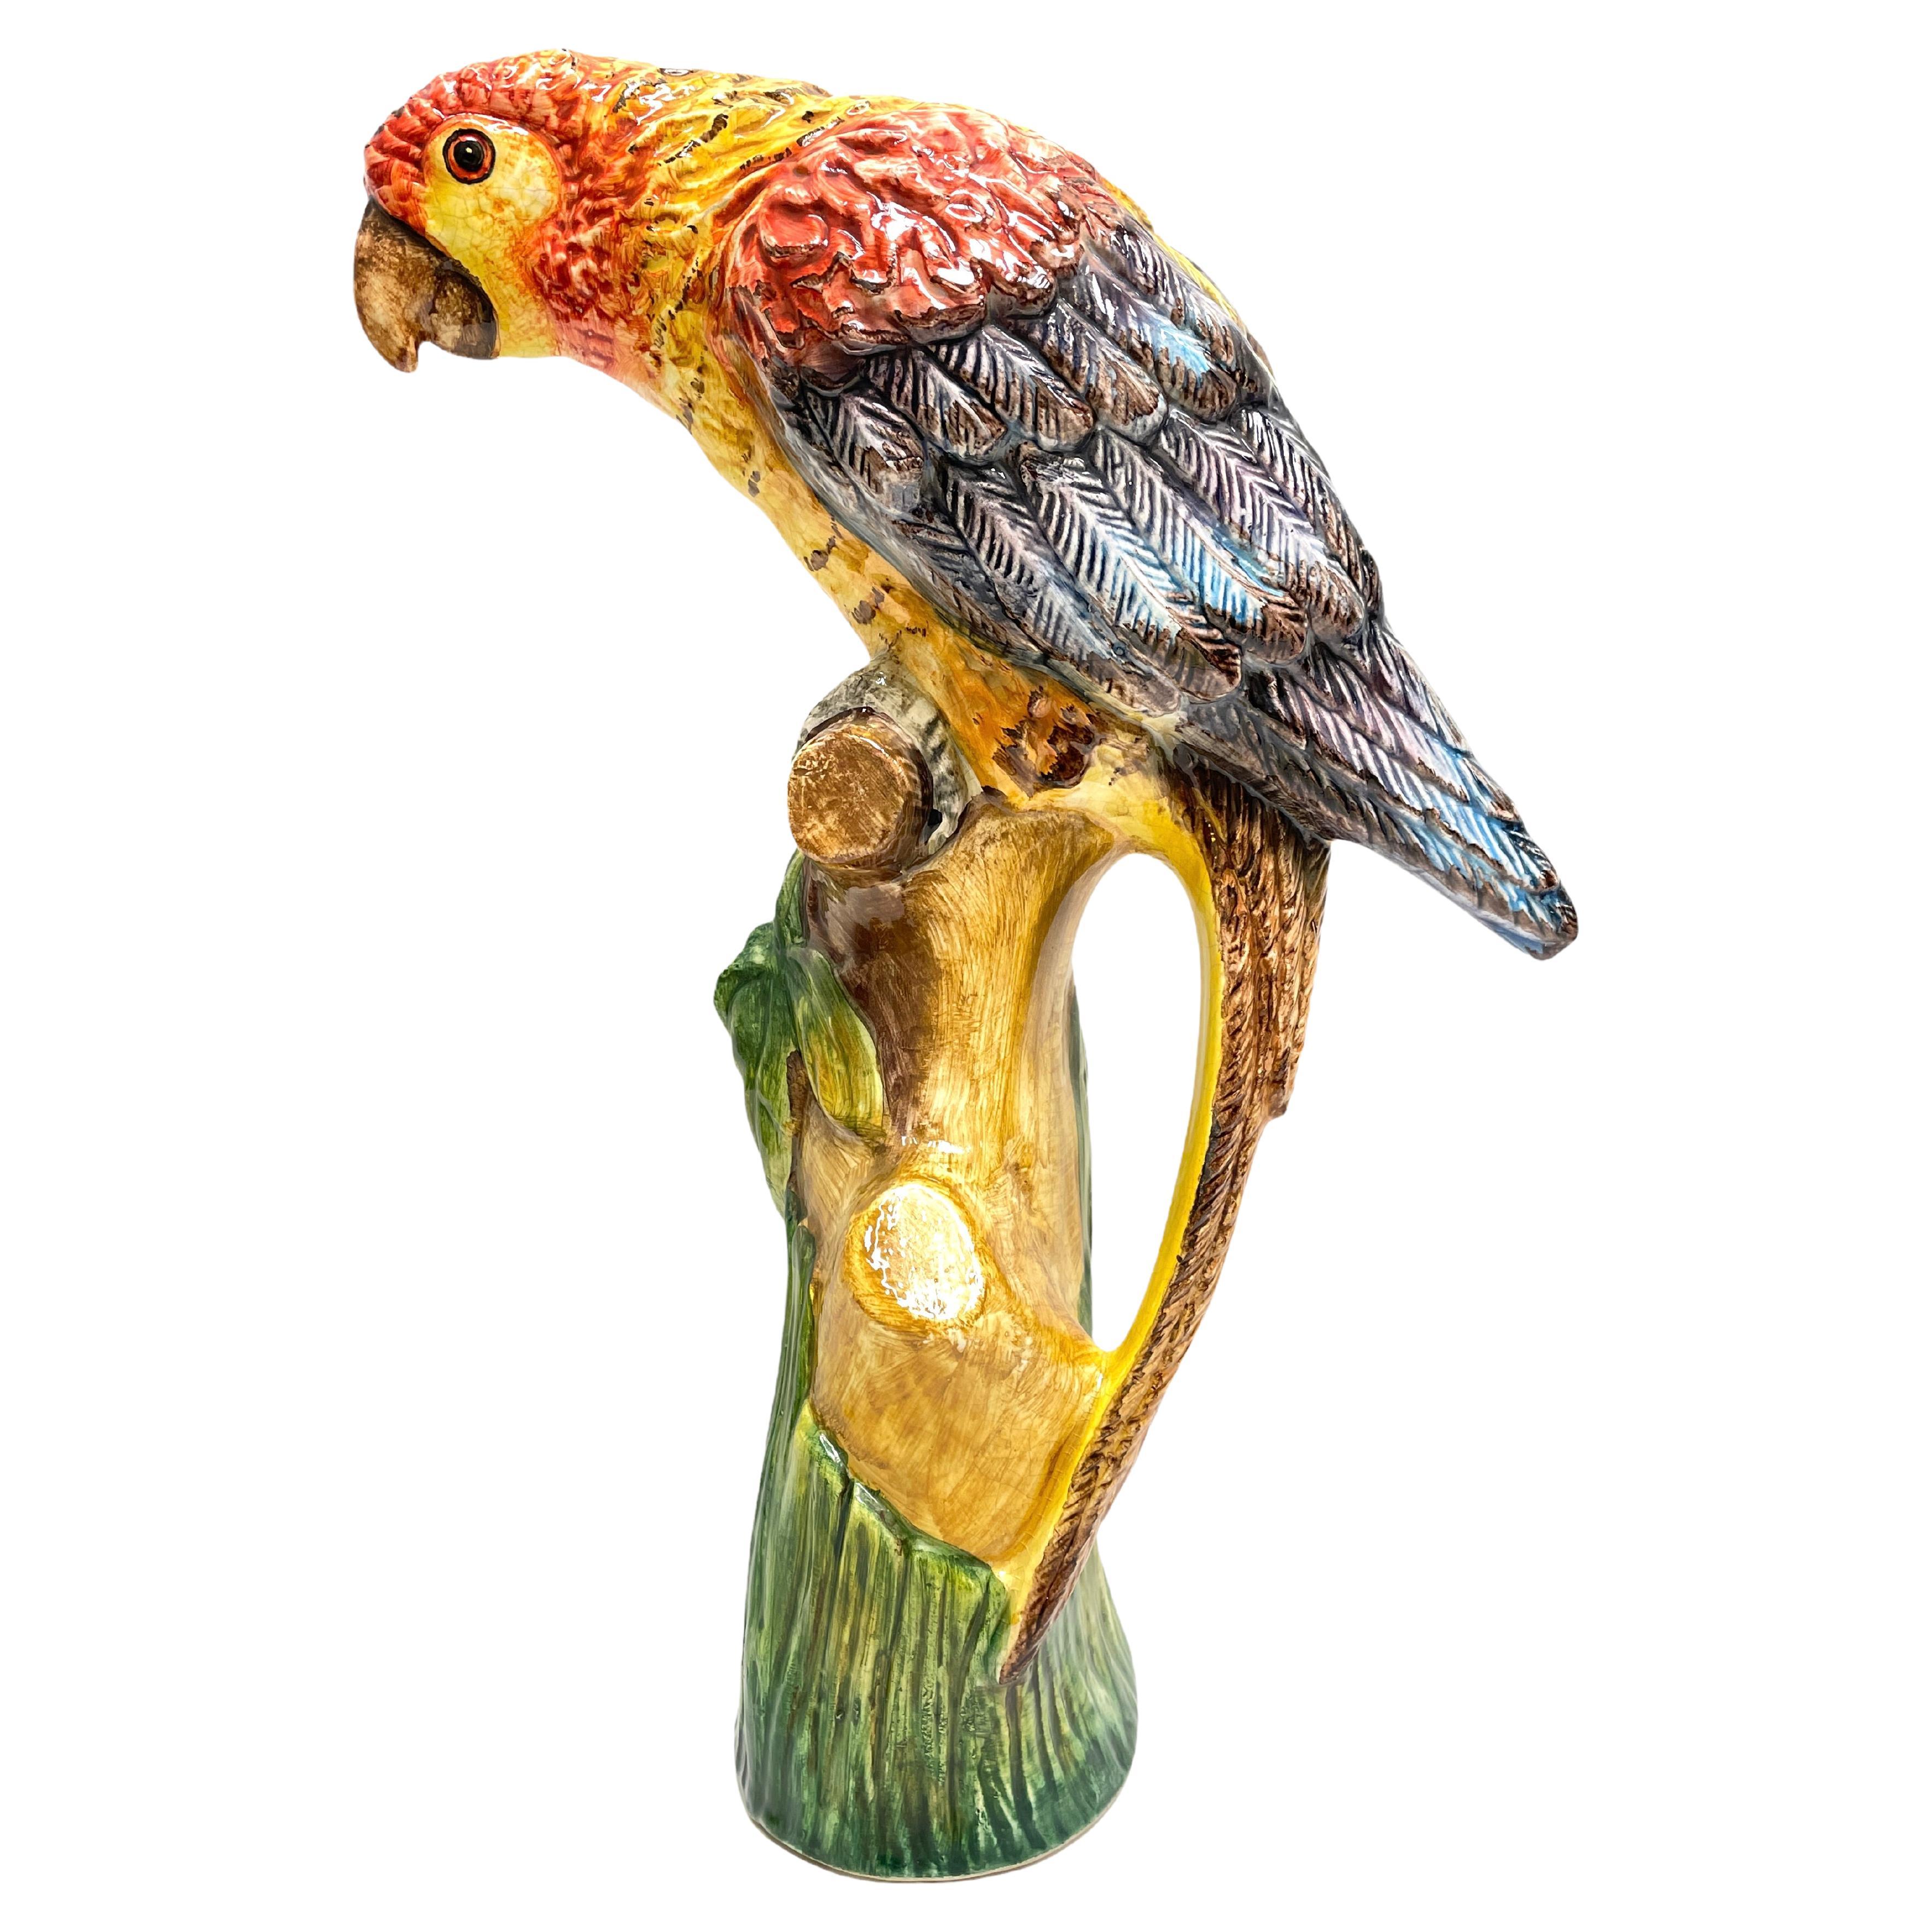 Vintage Hollywood Regency Parrot Statue Sculpture, Italy, 1950s